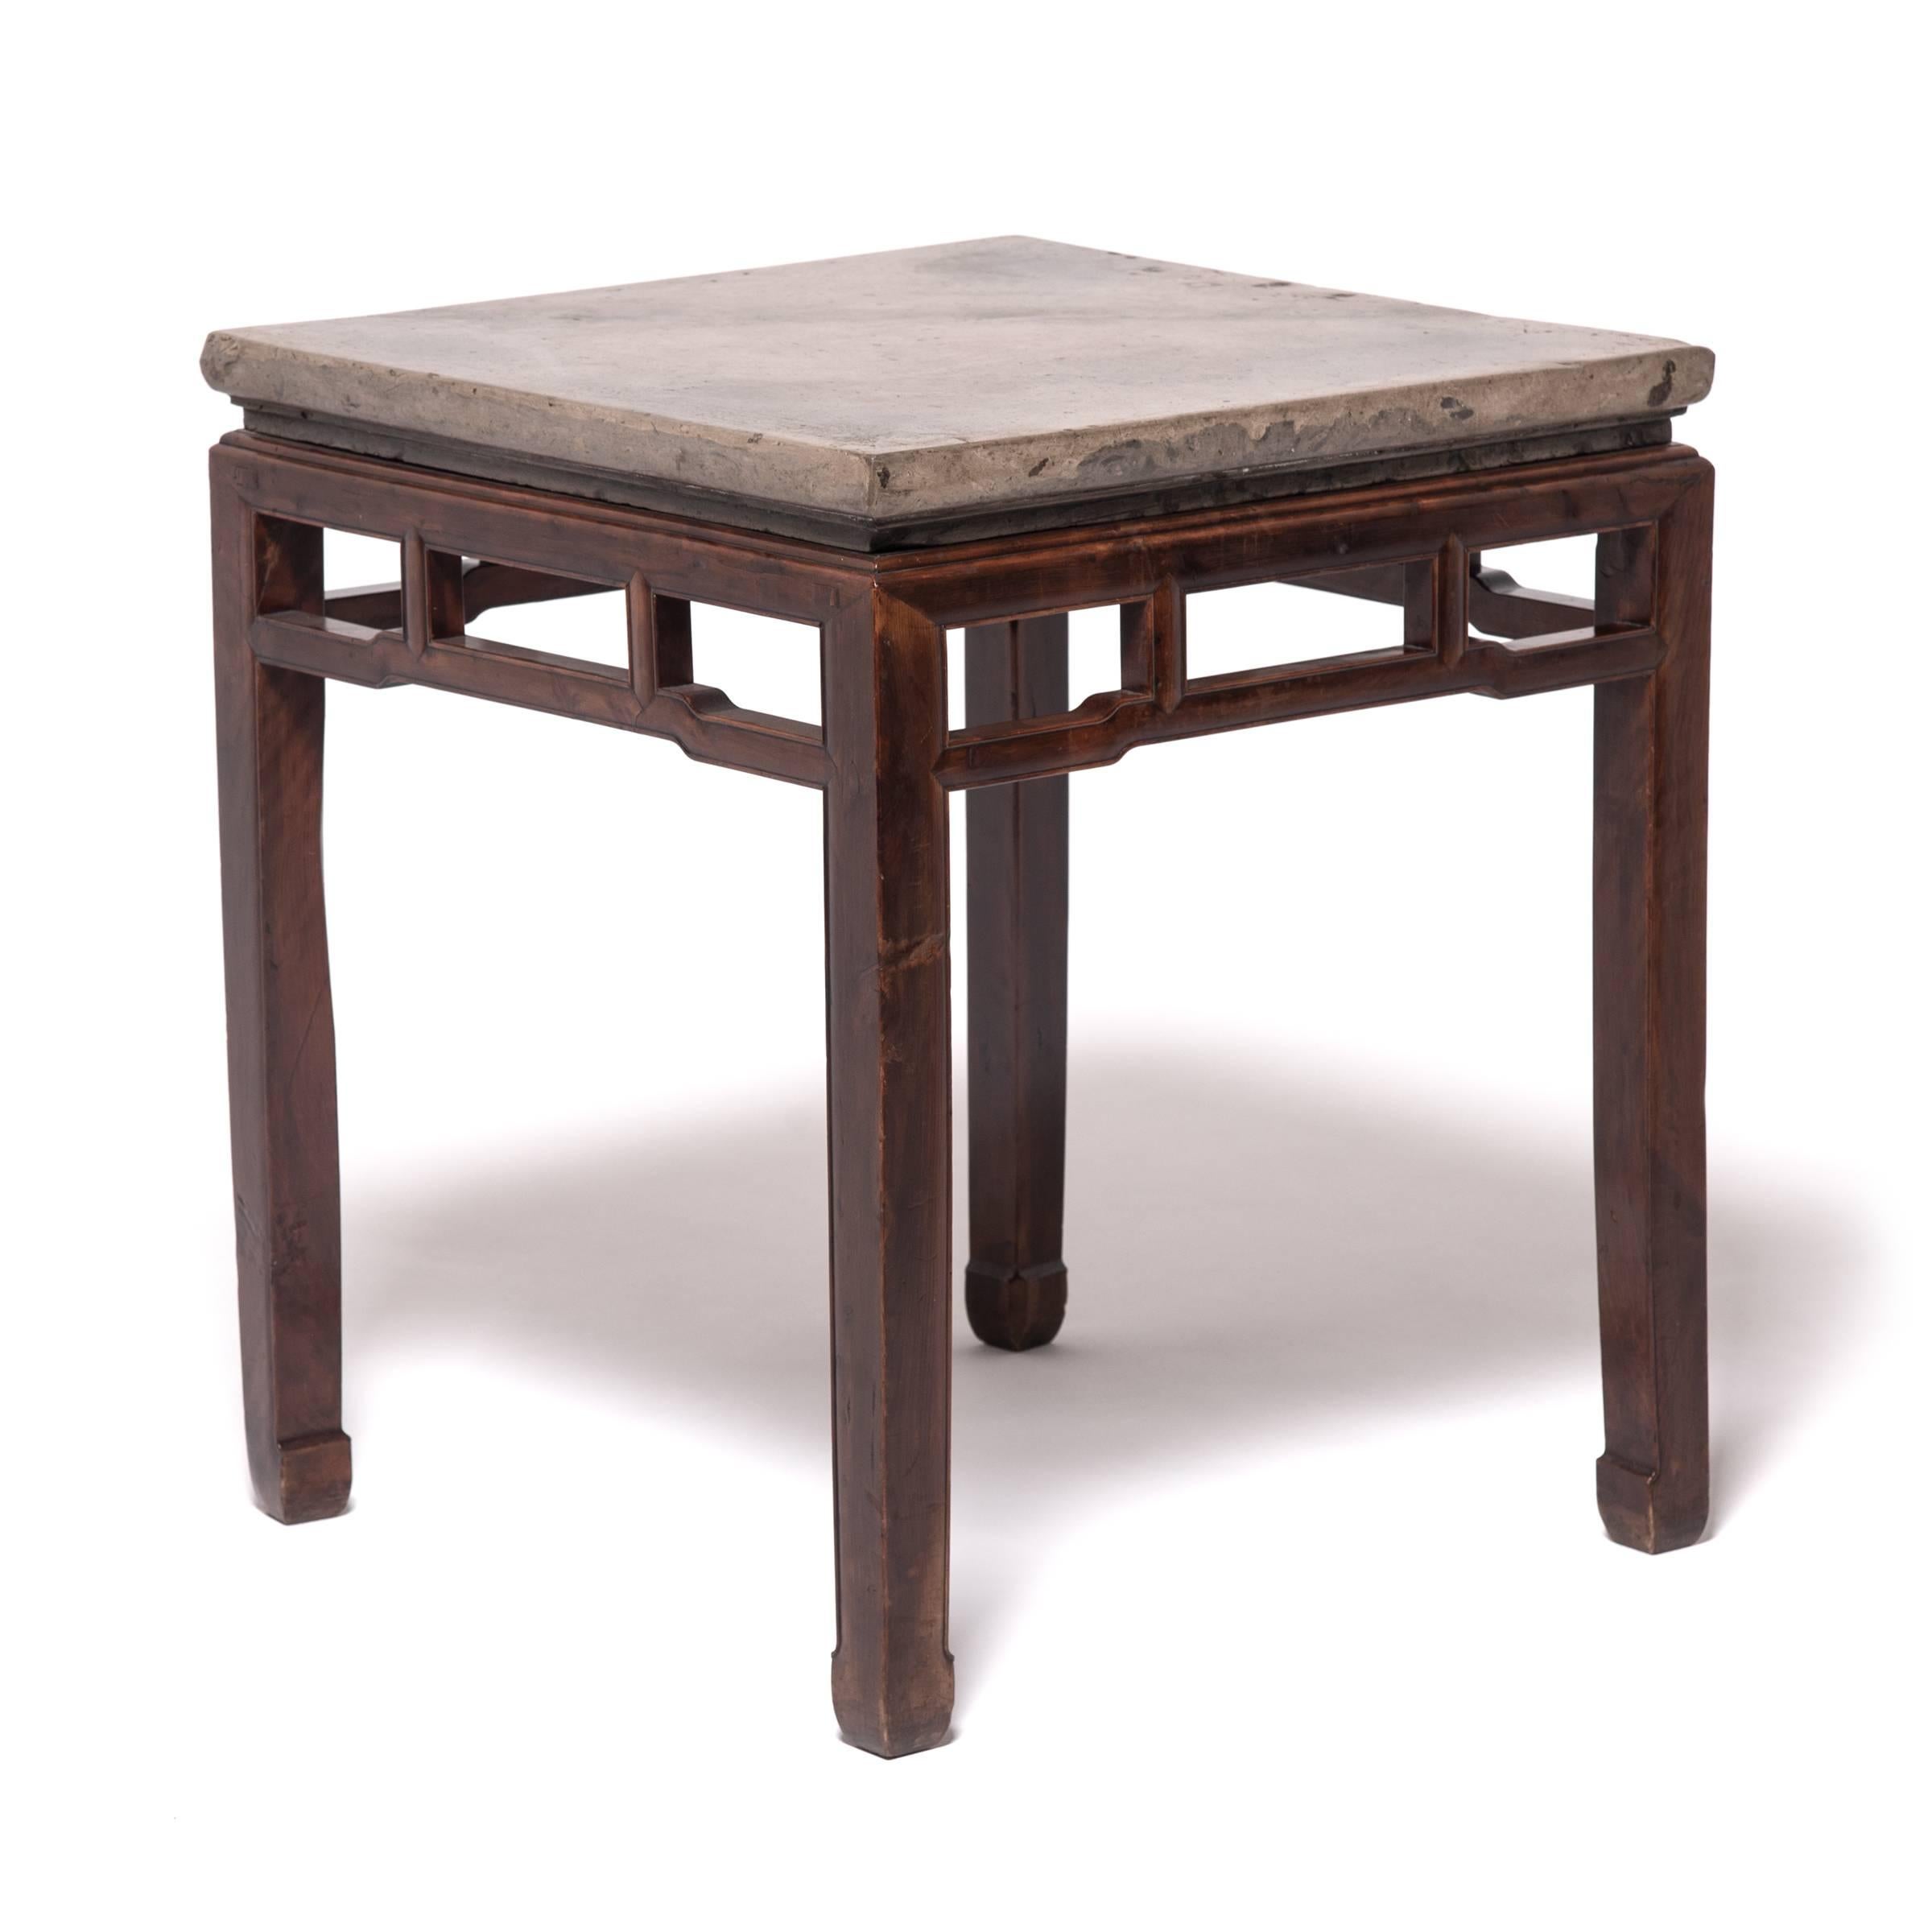 Qing Chinese Stone Top Incense Table, c. 1800